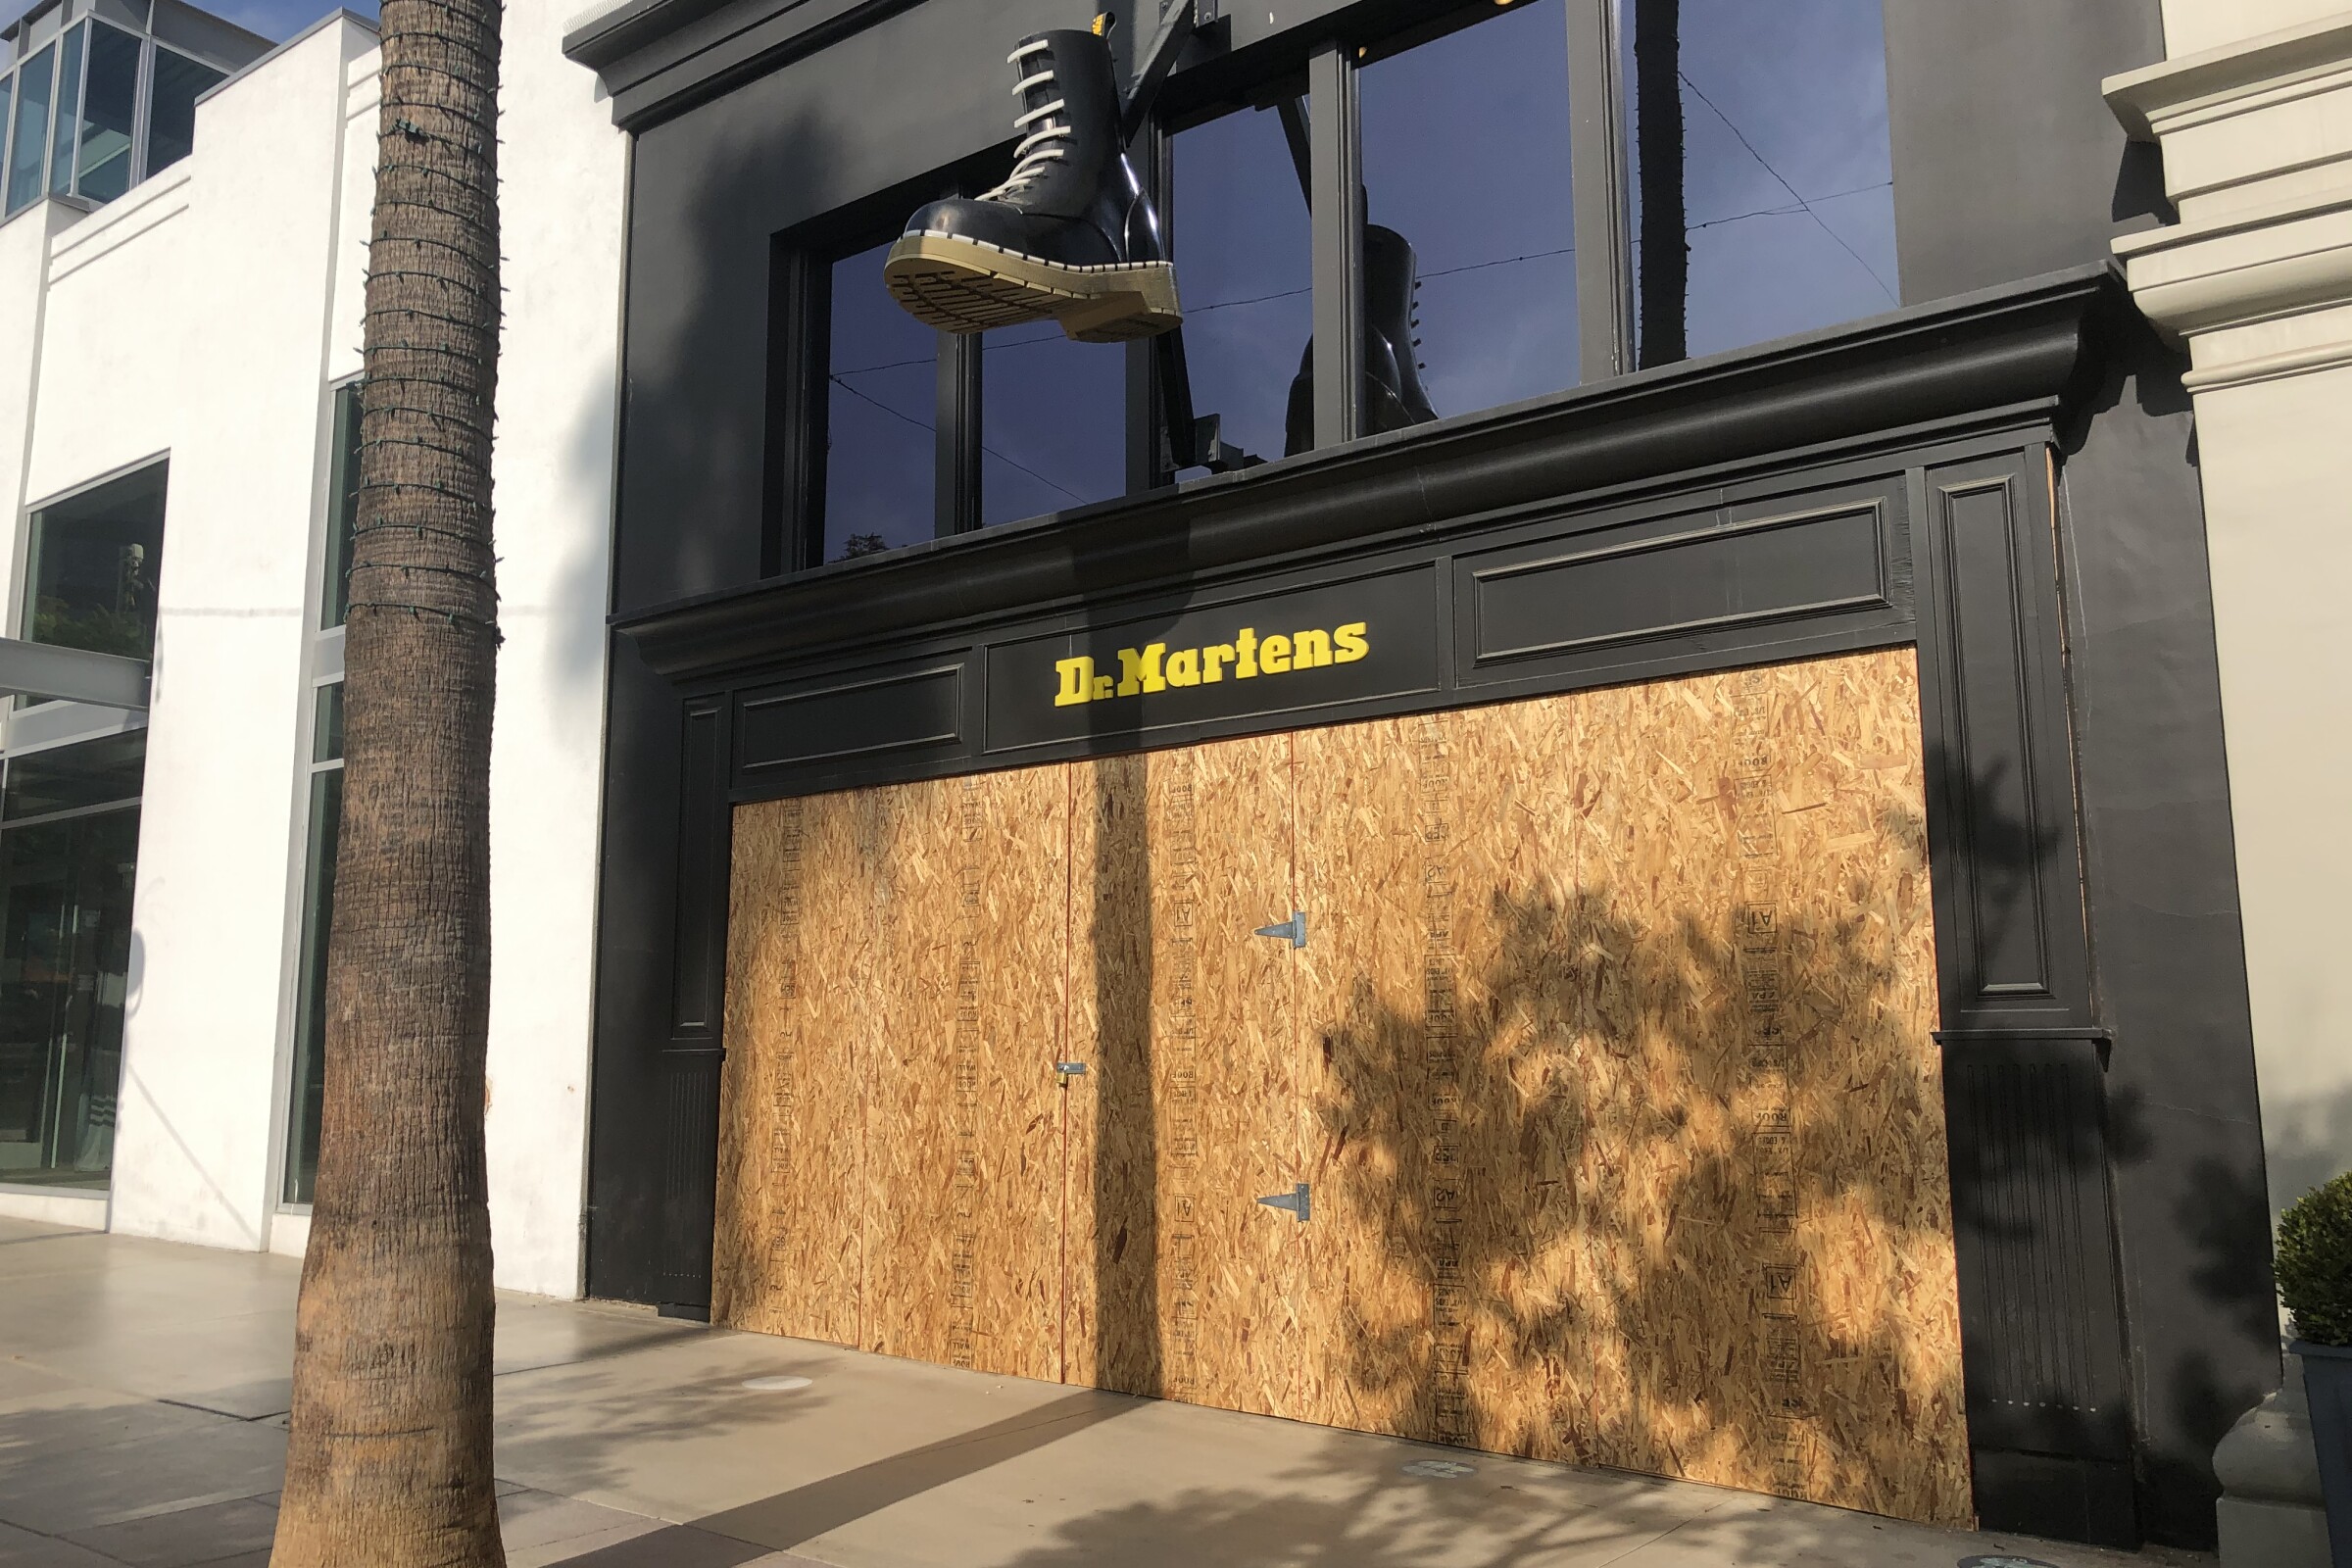 A giant Doc Martens boot hangs over a boarded up store on a pedestrian promenade